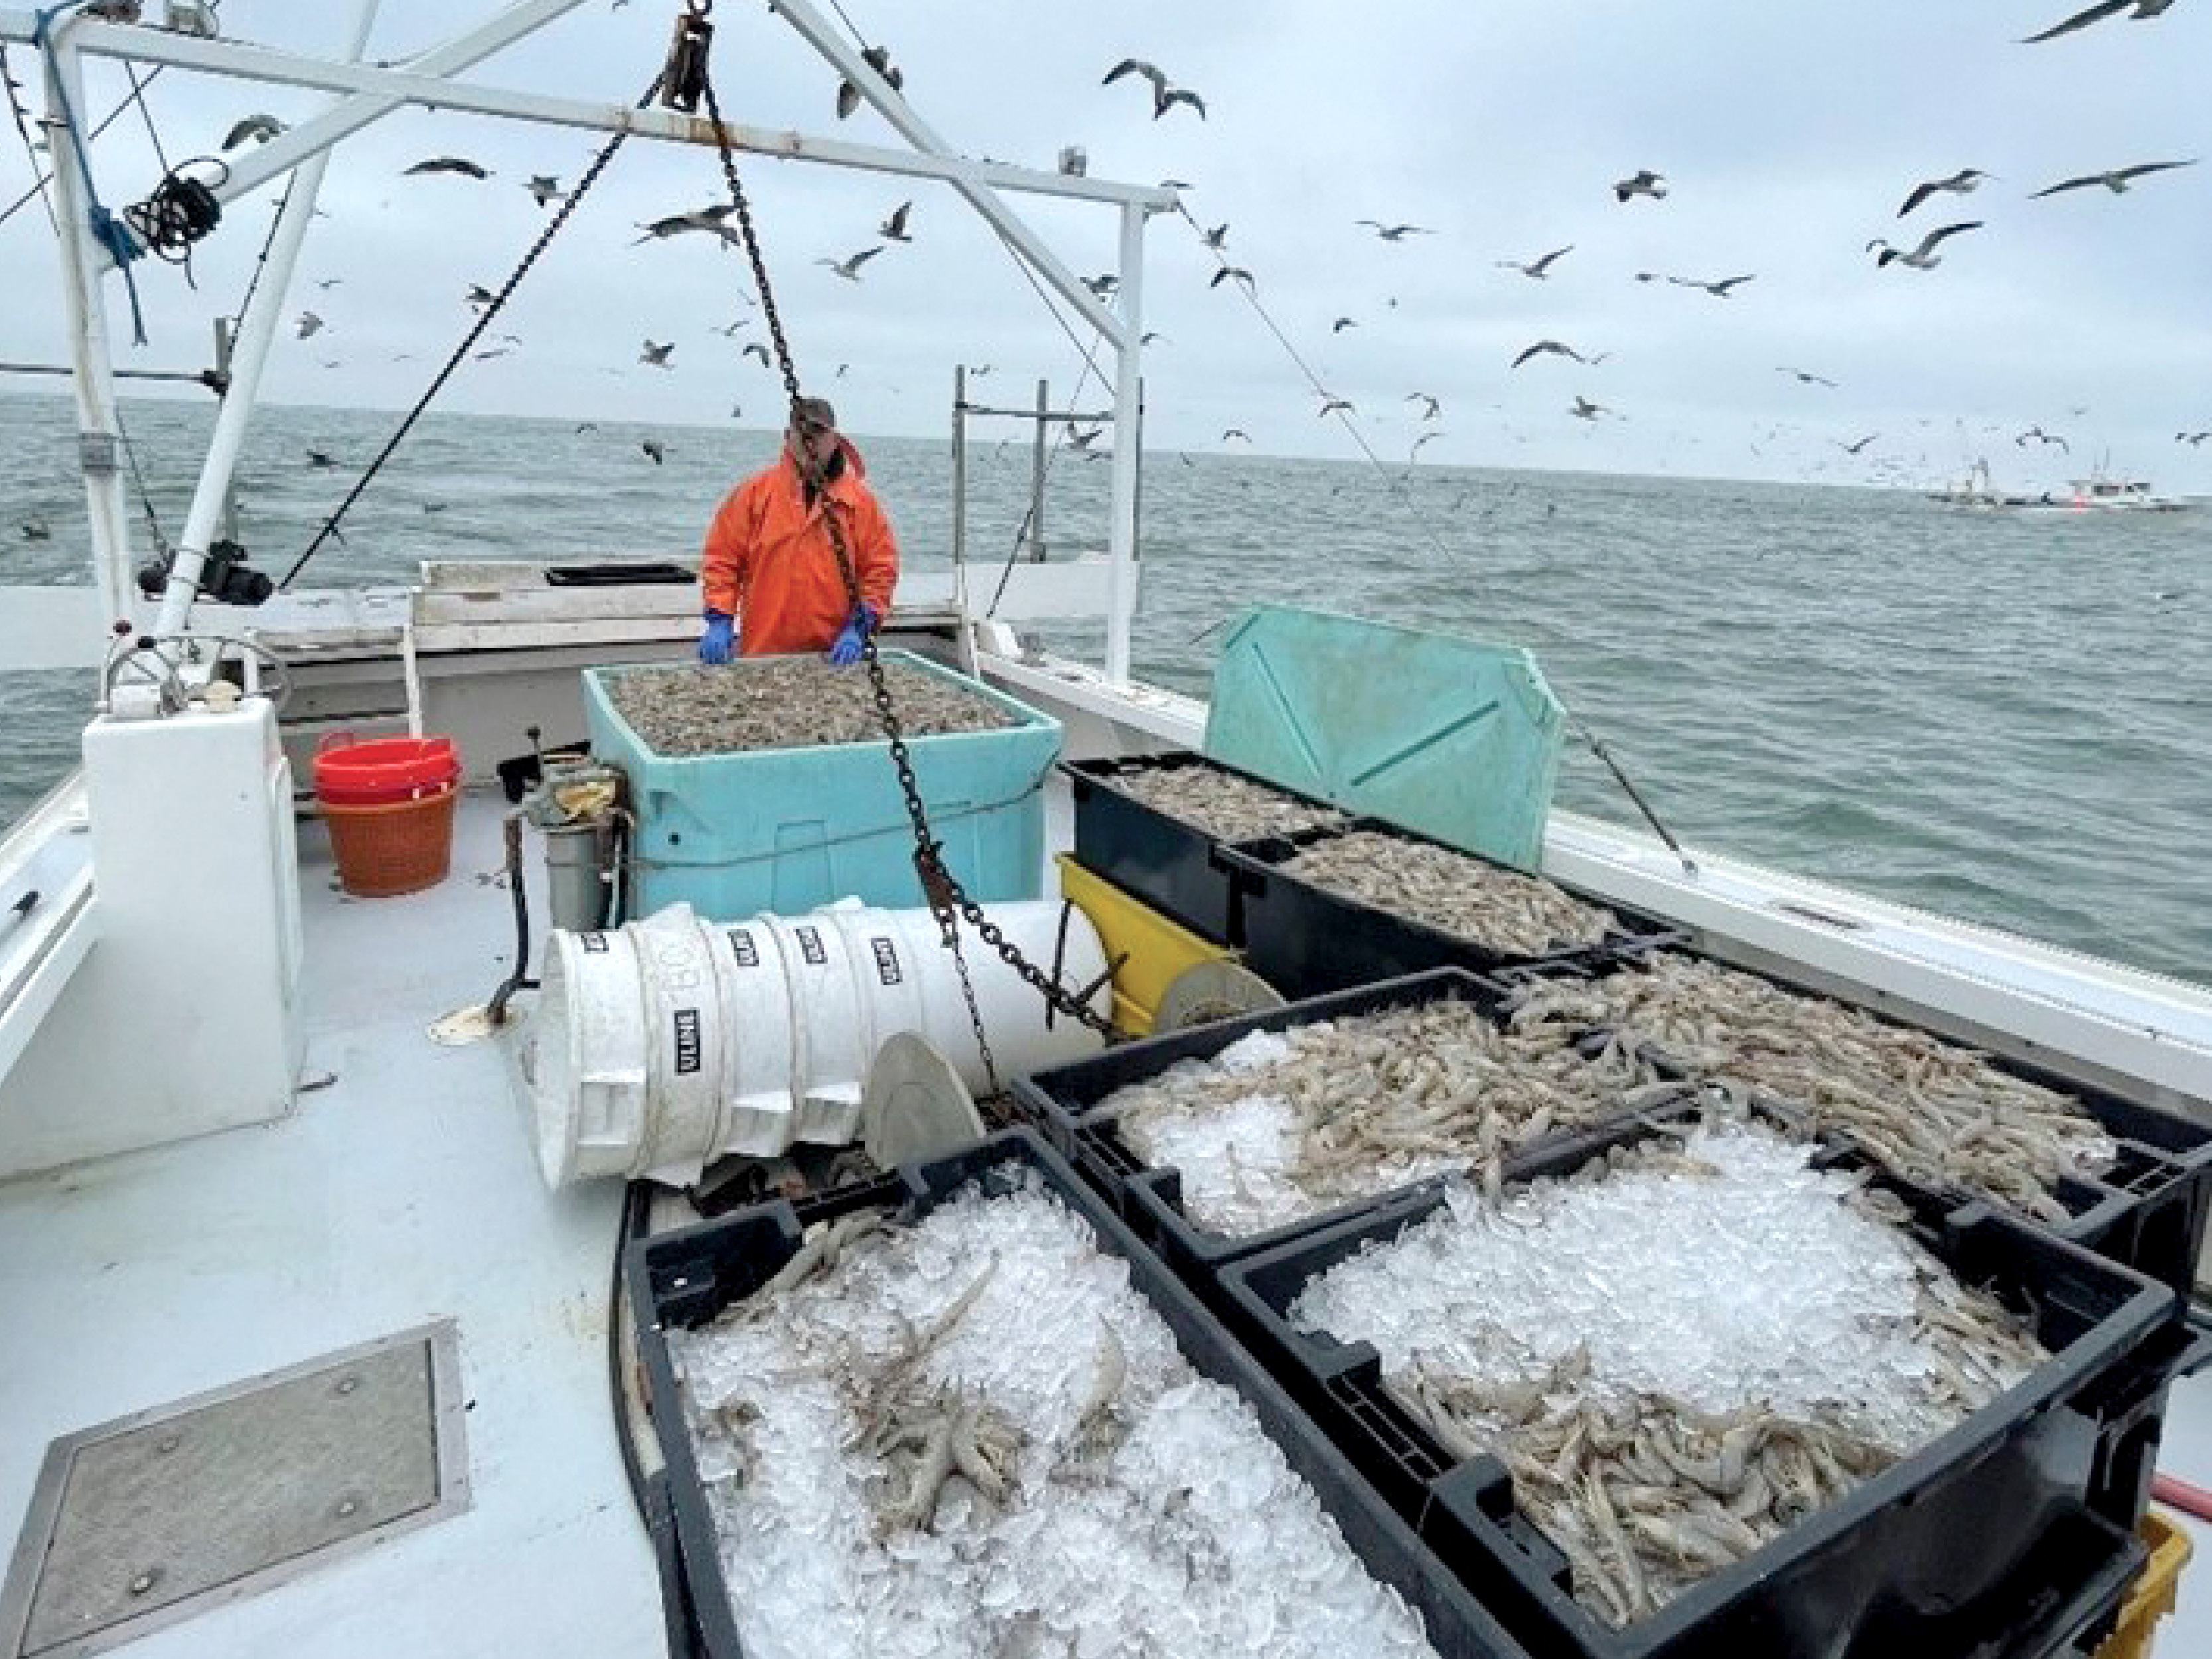 A shifting climate may be bringing a new commercial fishery to the  Mid-Atlantic